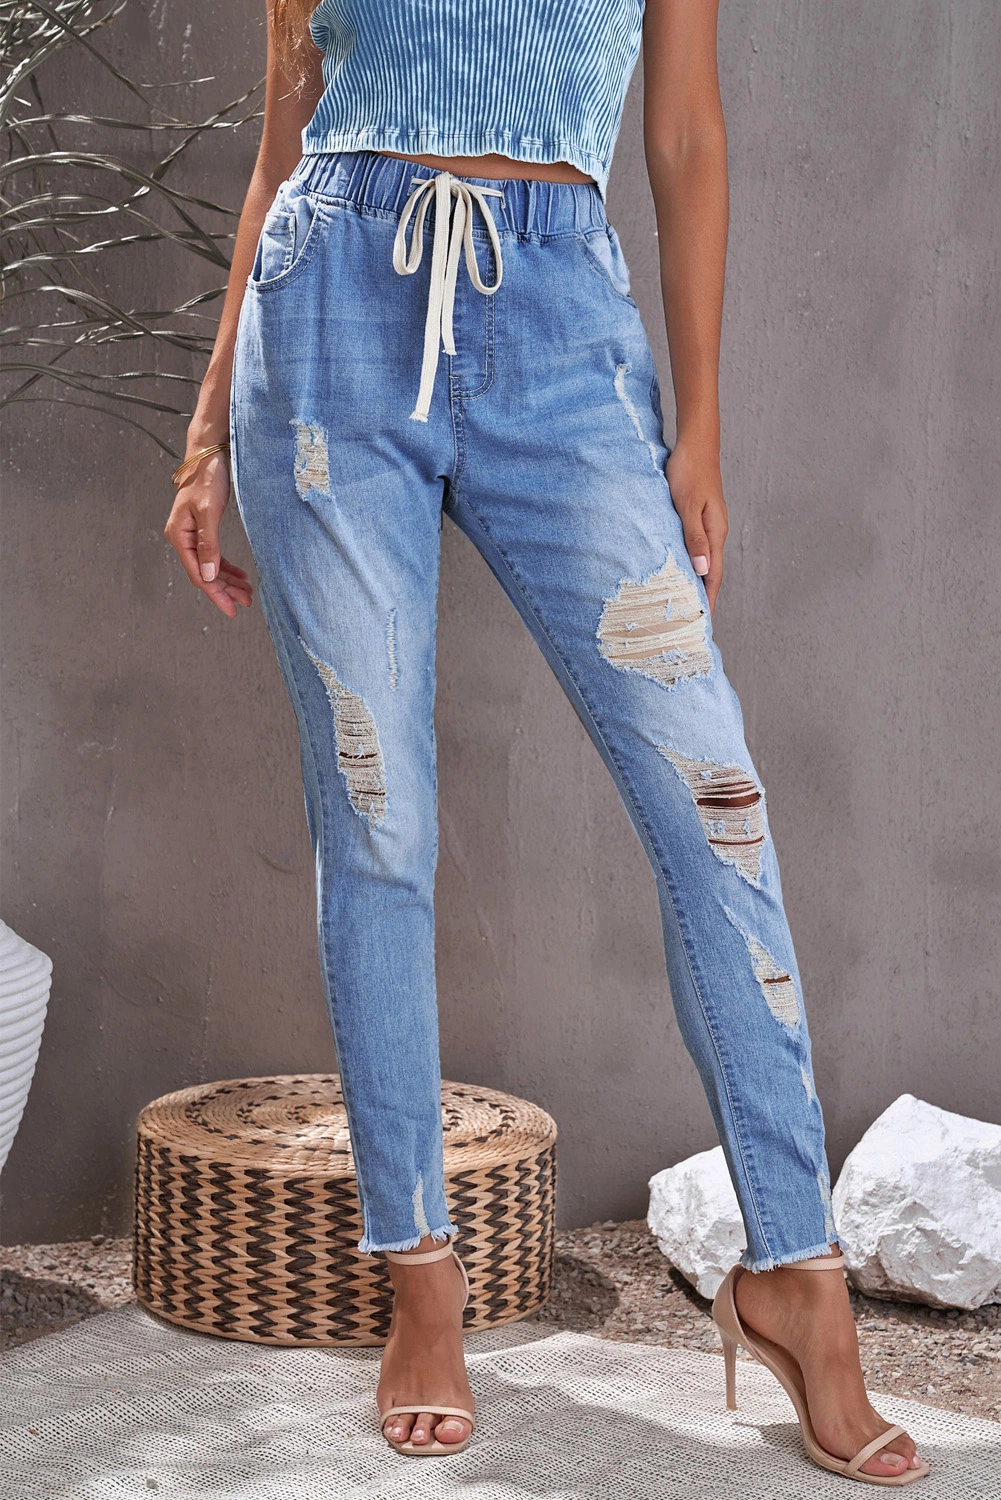 Dear-Lover Blank Apparel Wholesale Western Clothing New Blue Ripped Baggy Distressed Pants Trousers Ladies Torn Hole Stretch Women Denim Women&prime;s Jeans